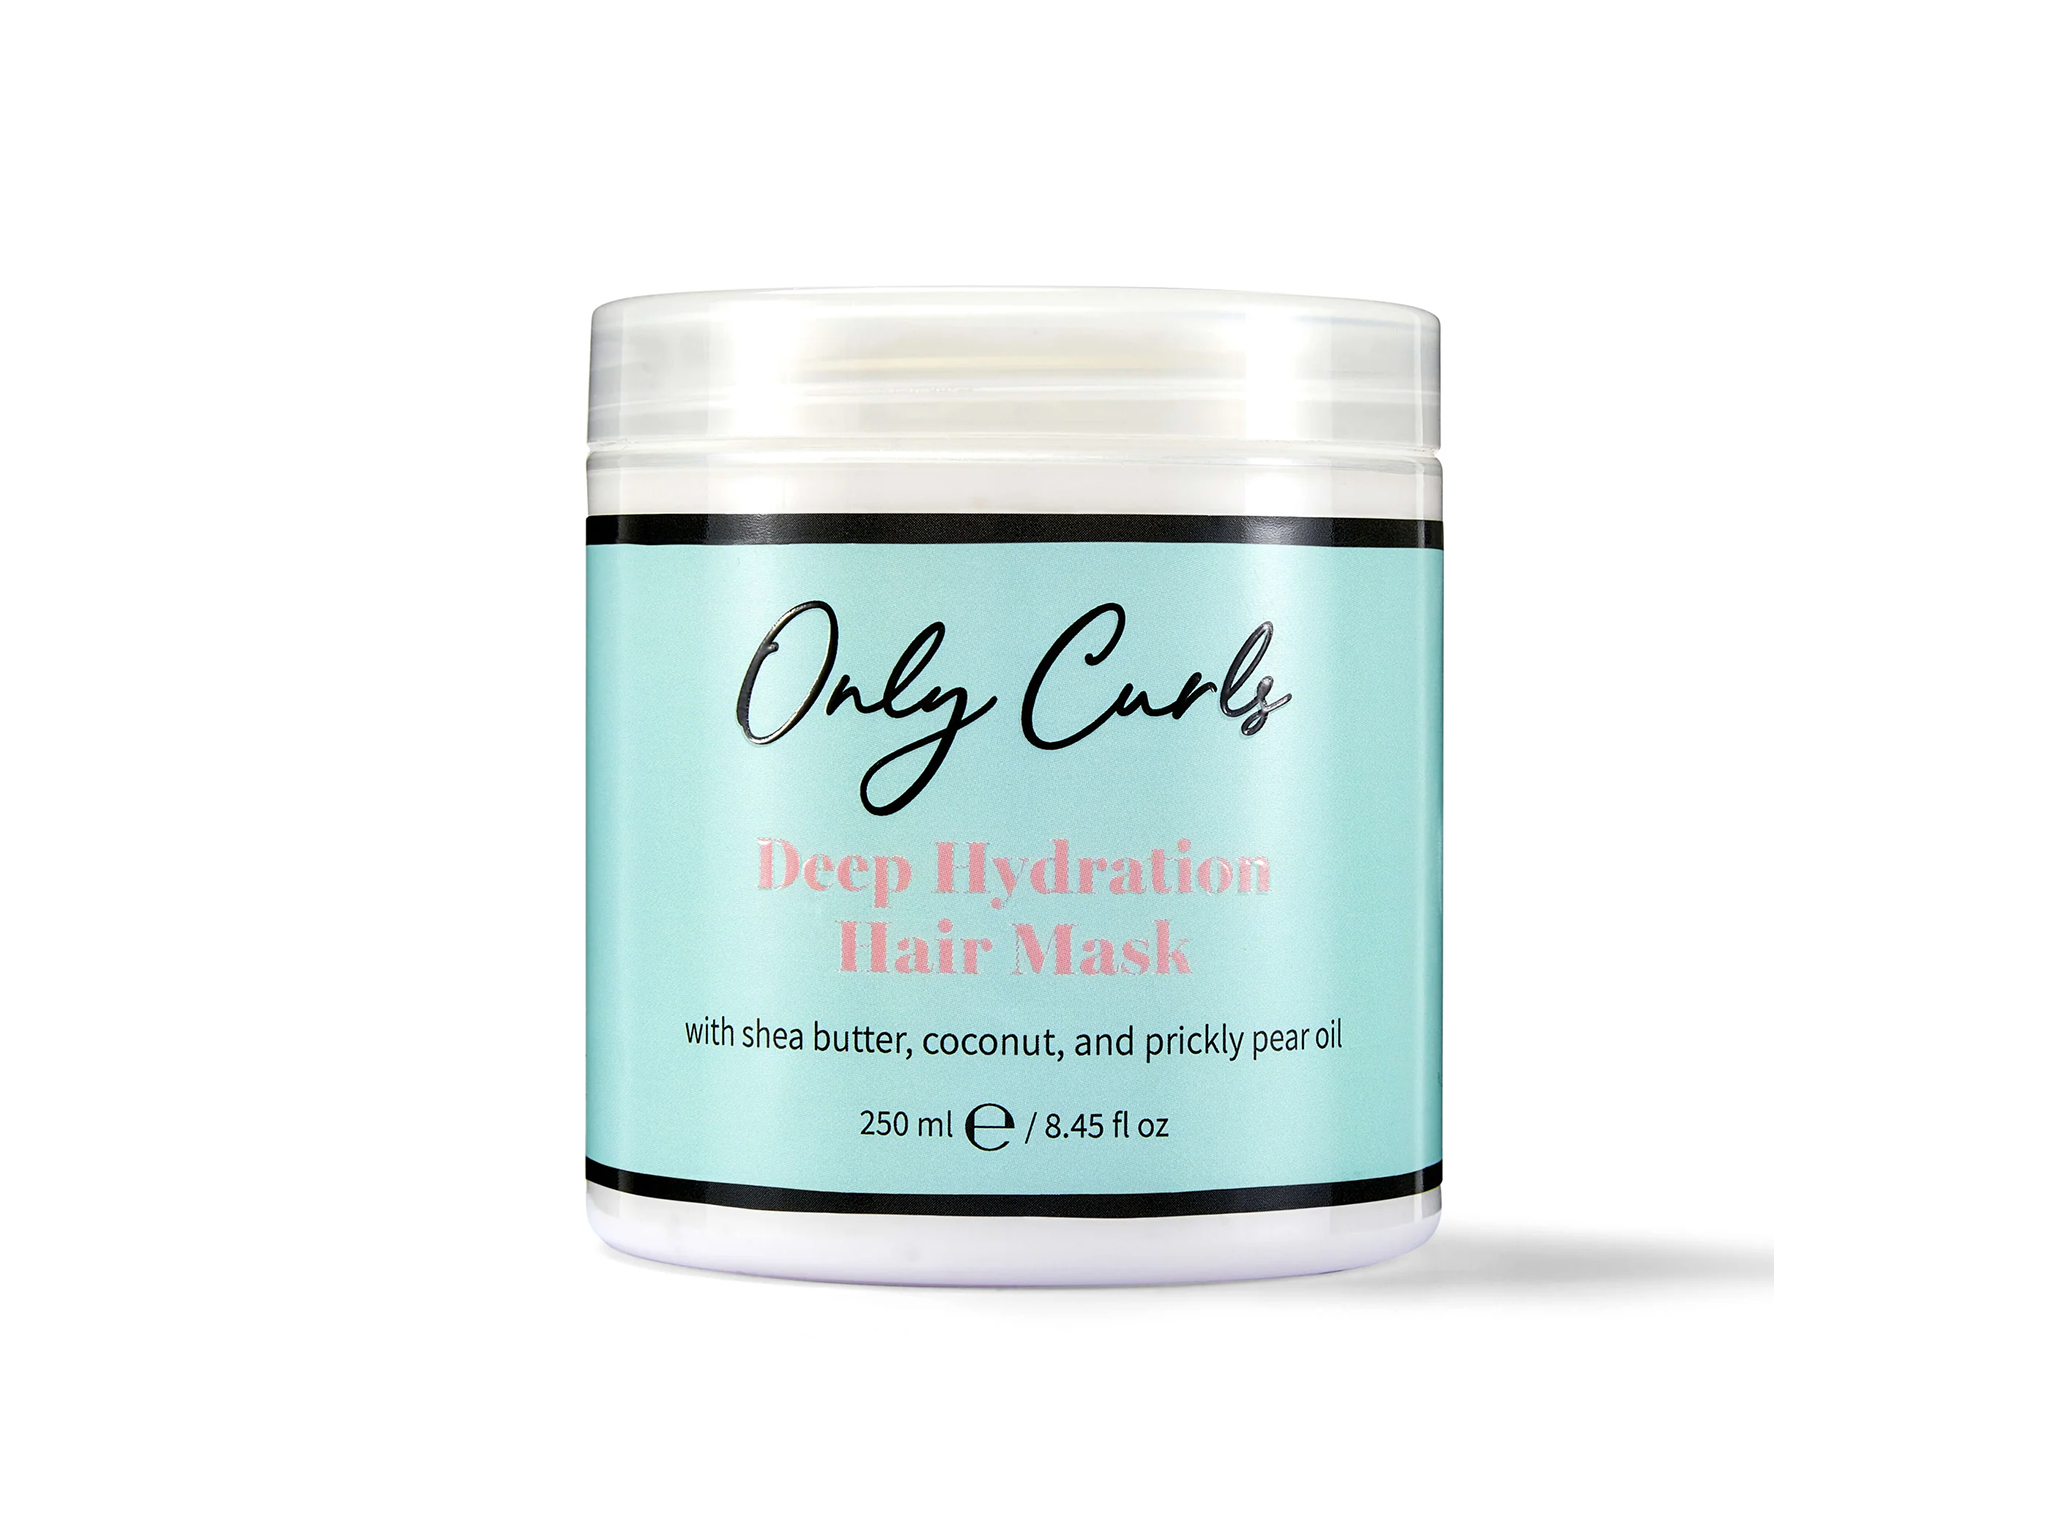 Only Curls products review curly hair hydrating hair mask